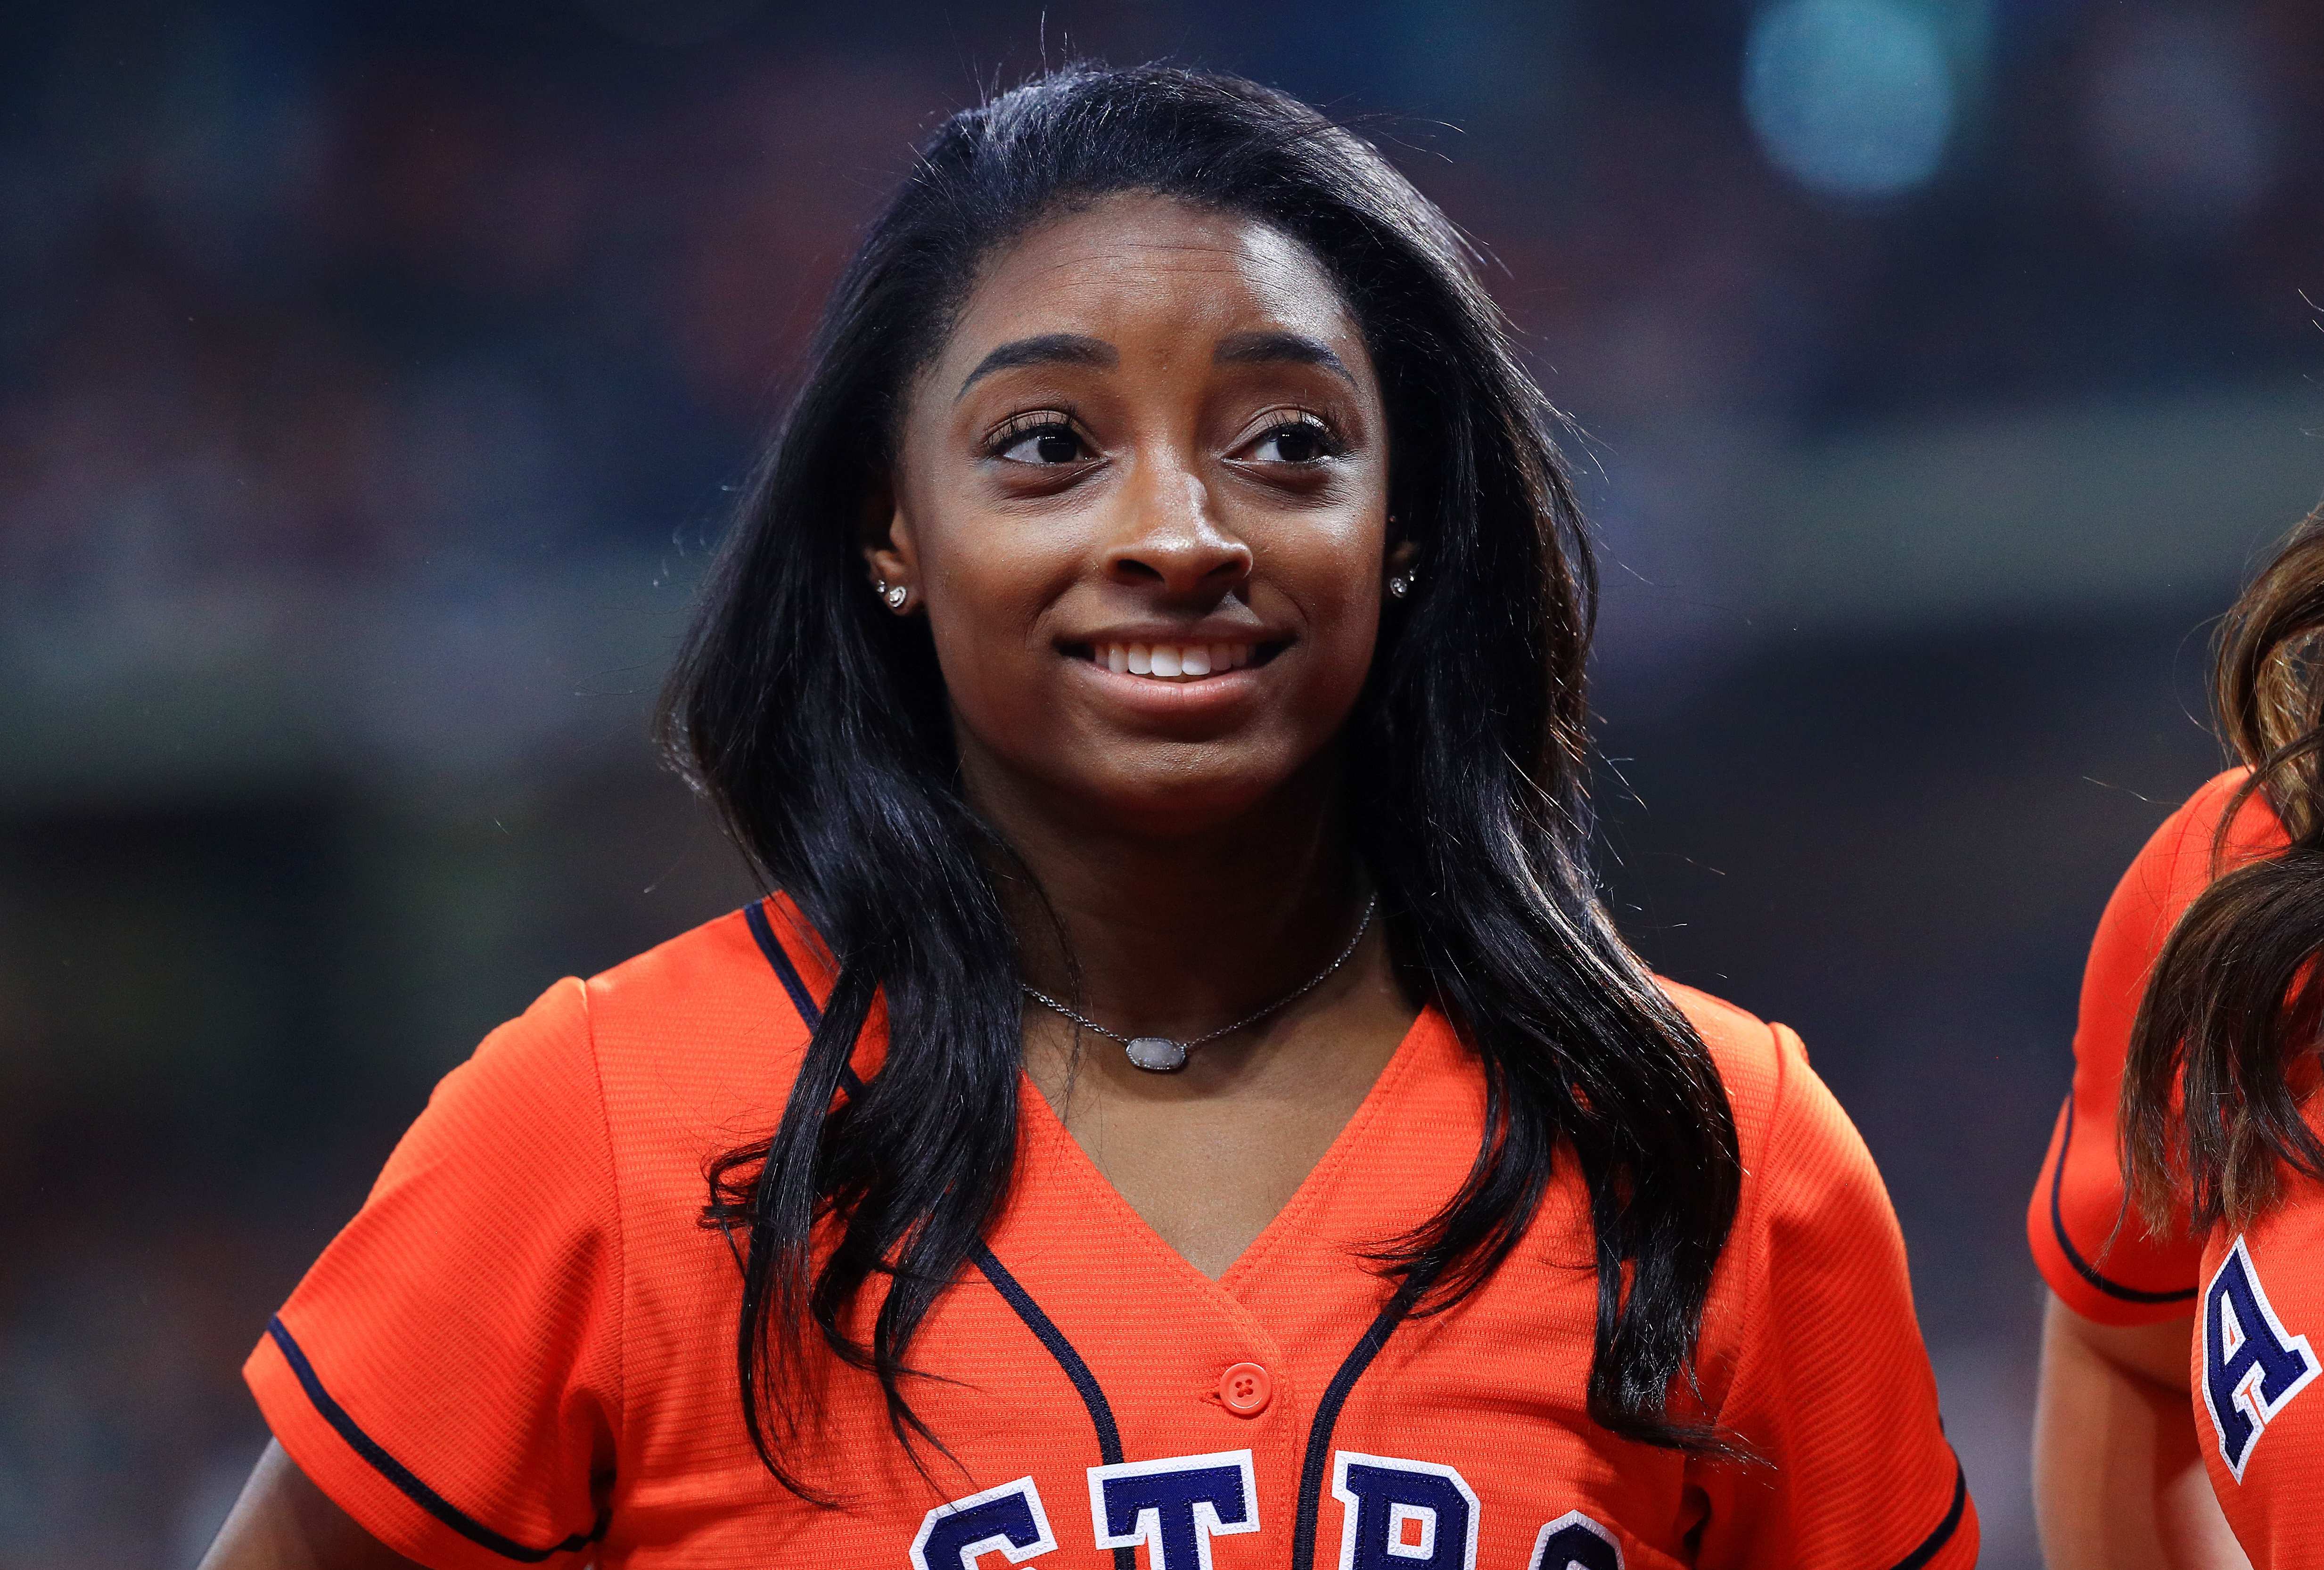 Simone Biles at the 2019 World Series between the Houston Astros and the Washington Nationals at Minute Maid Park on October 23, 2019 in Houston, Texas.| Source: Getty Images